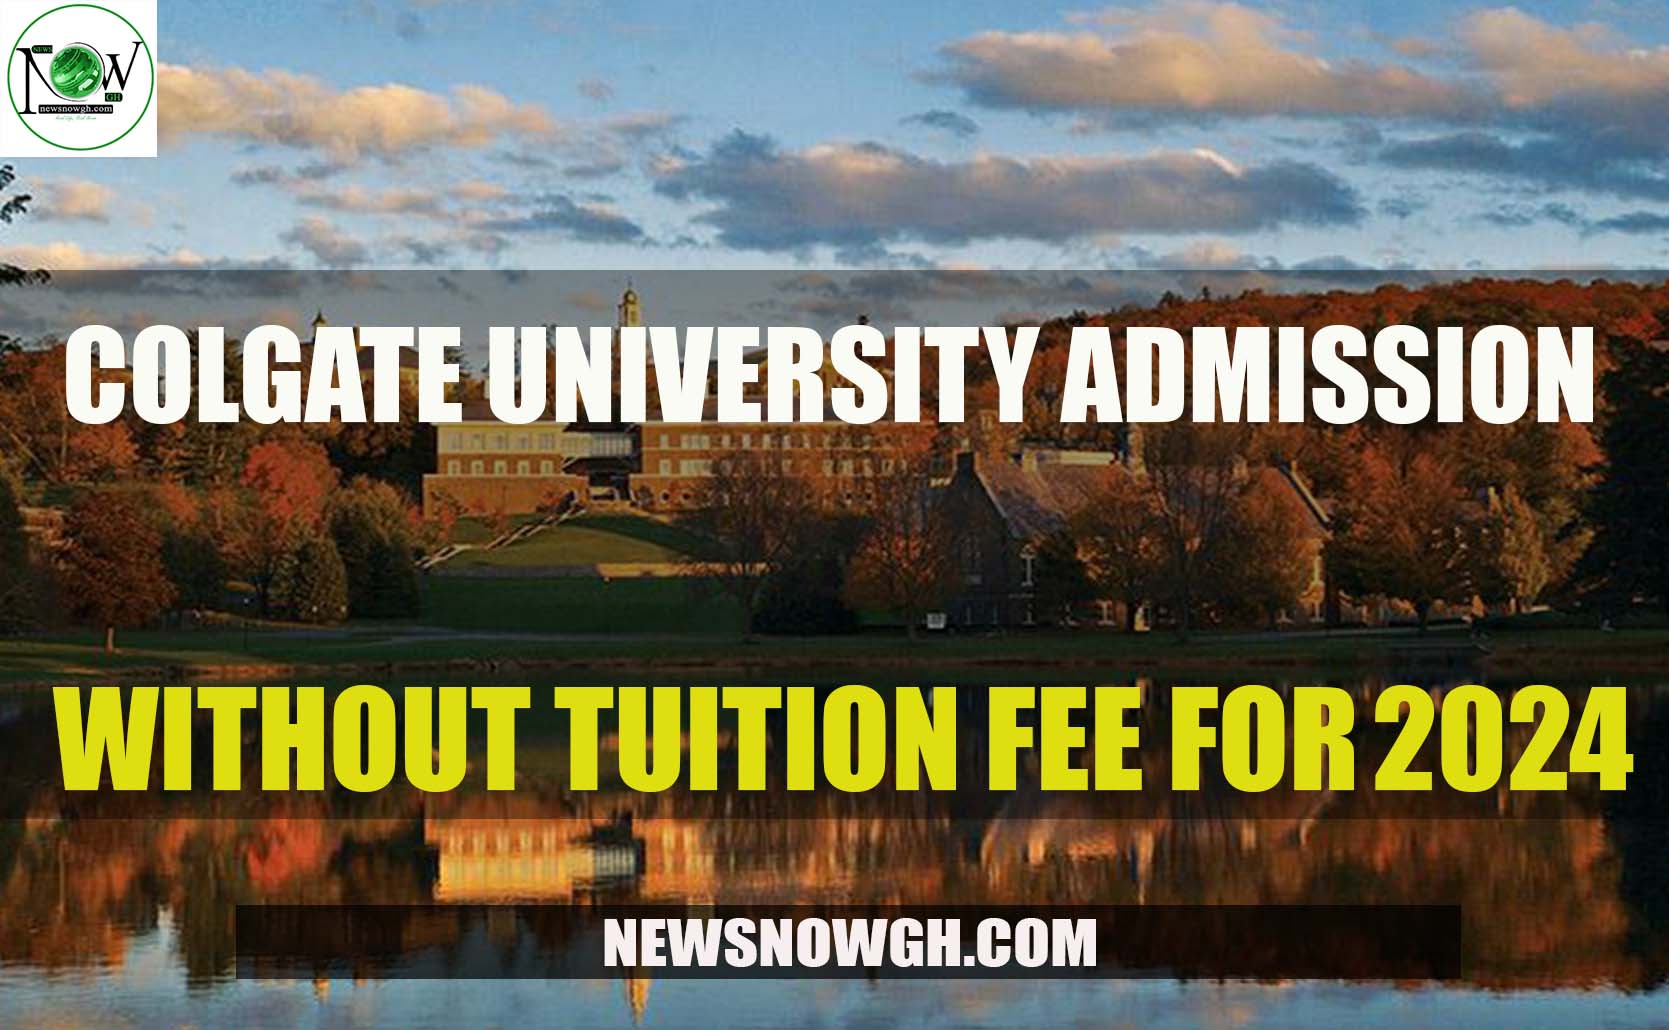 Colgate University admissions without tuition fee for 202425